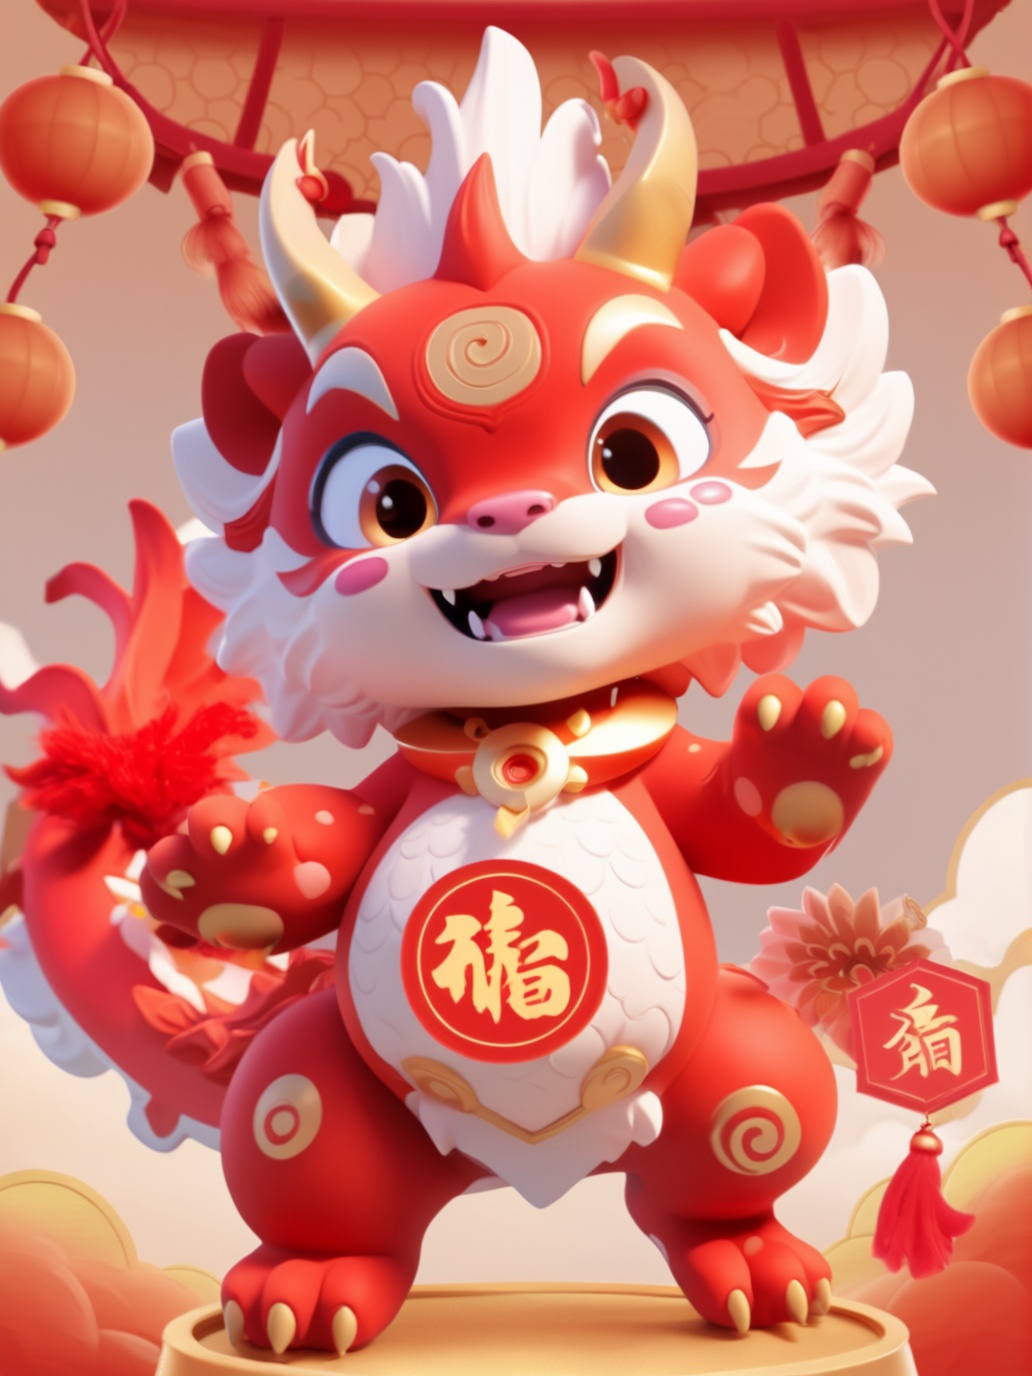 a vibrant and animated character that appears to be a fusion of a lion and a dragon.Holding a pair of Chinese couplets in hand,The character is predominantly red with white and gold accents. It has large, expressive eyes with a mix of blue and green hues. The character is adorned with a traditional Chinese lion dance mask, which is white with red and gold details. The mask has two large, round eyes and a prominent, curved mouth. The character is also wearing a golden necklace with a circular pendant. It has a playful expression, with its mouth open, revealing its teeth, and its tail is curled up, resembling a lion's tail. The character is set against a gradient background that transitions from a light pinkish hue at the top to a deeper pinkish-red at the bottom<lora:LONG IP:1>